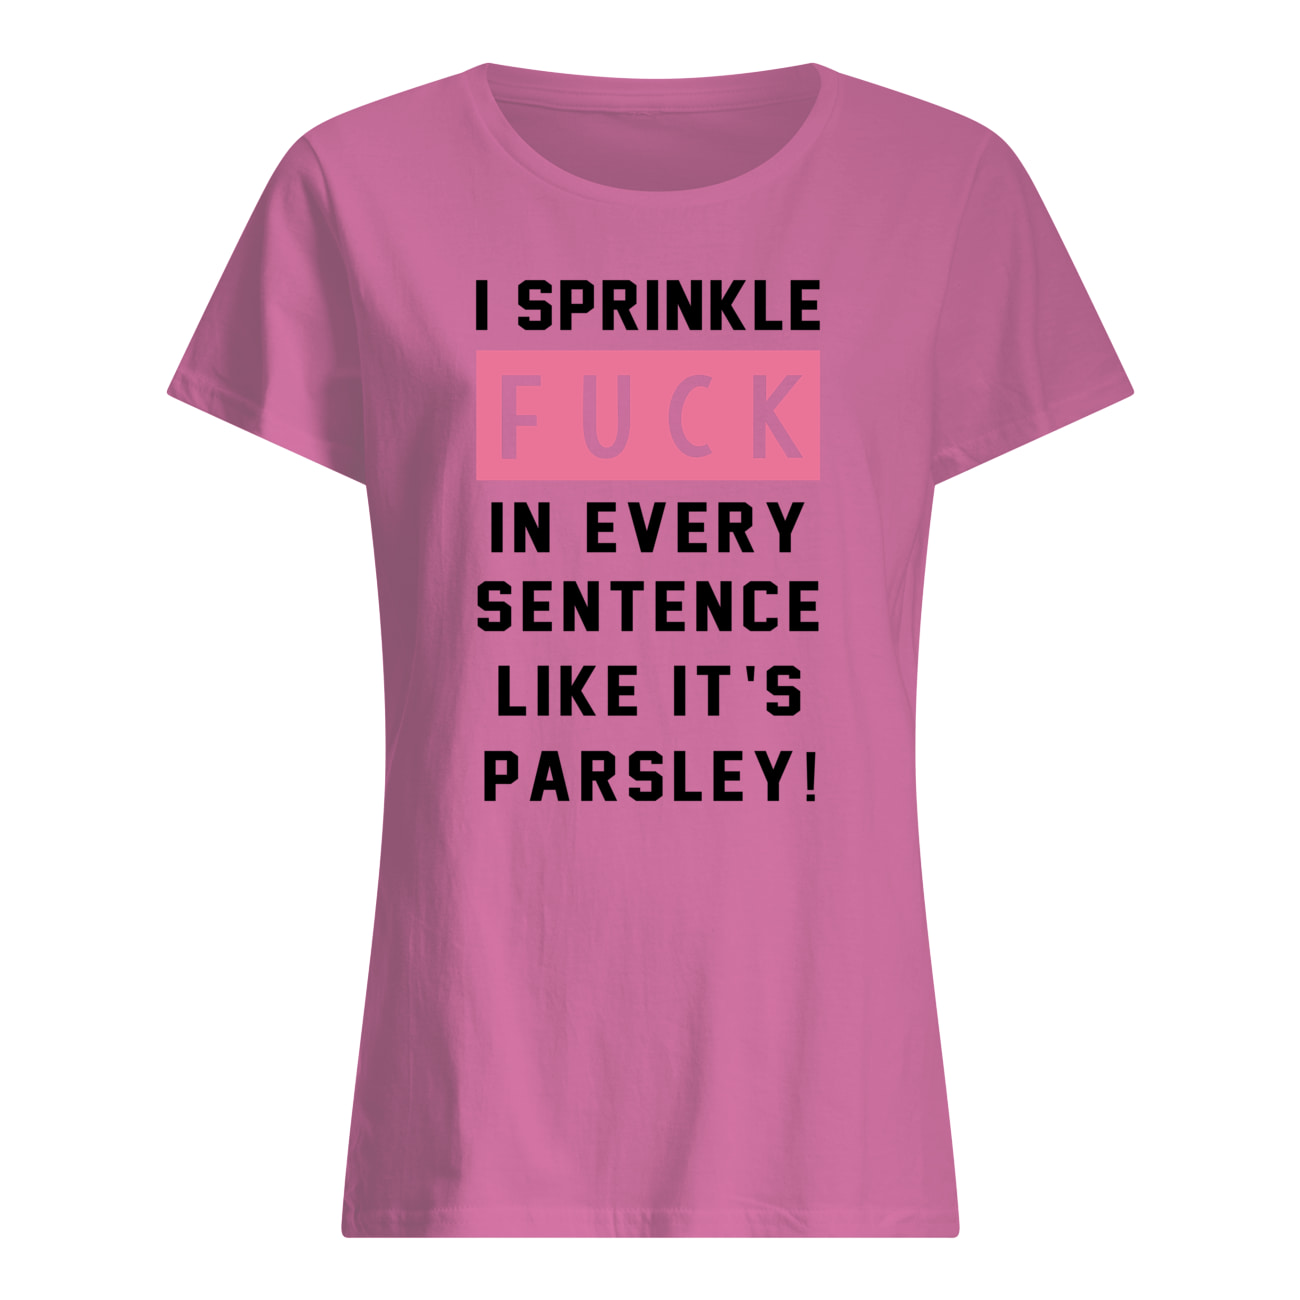 I sprinkle fuck in every sentence like it's parsley womens shirt